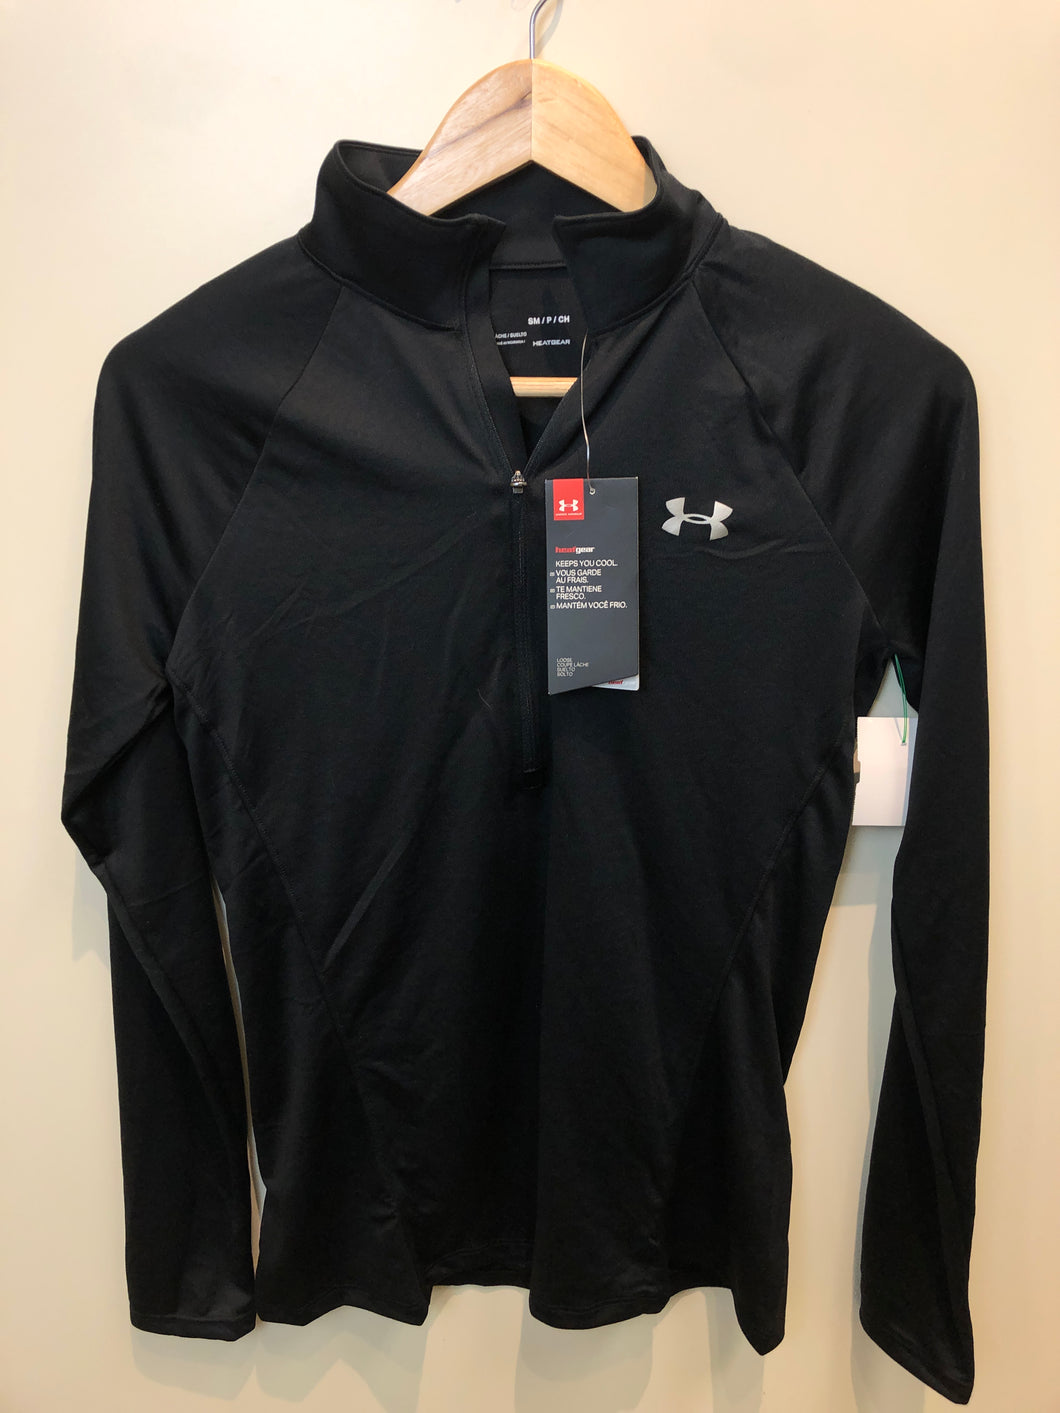 Under Armour Athletic Top Size Small